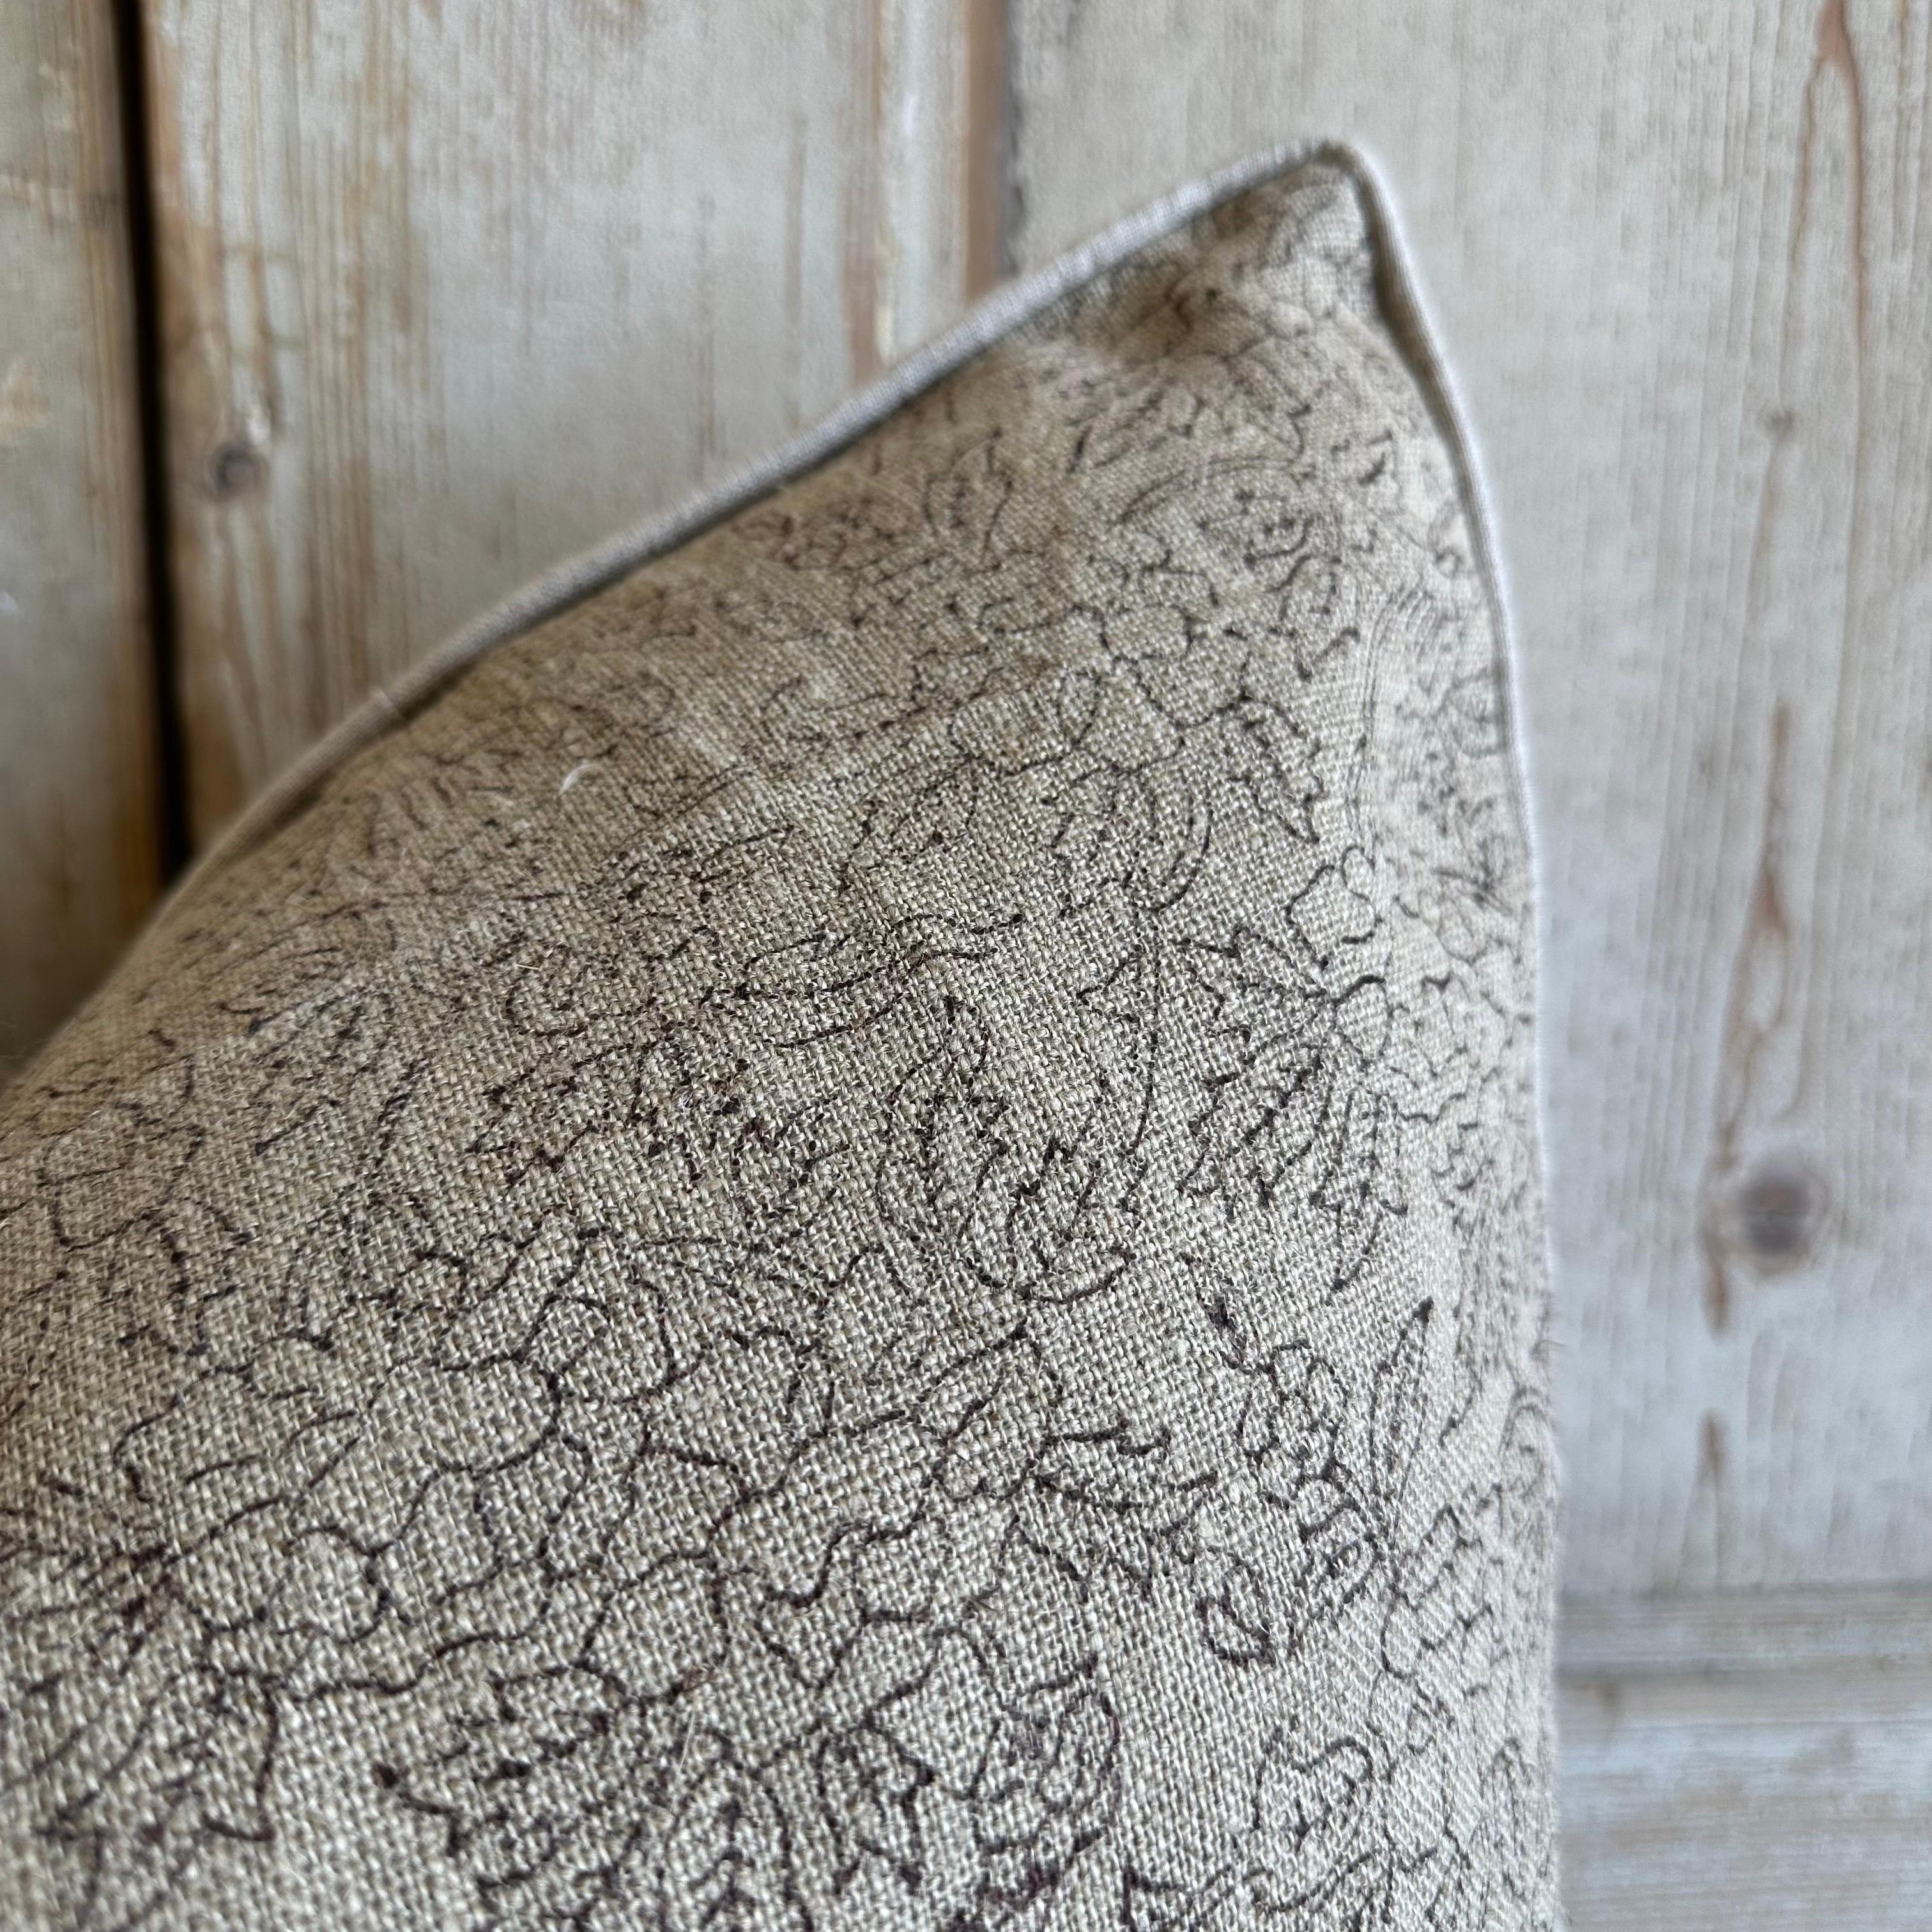 Marceline Coco Block Printed Linen Pillow with Down Feather Insert In New Condition For Sale In Brea, CA